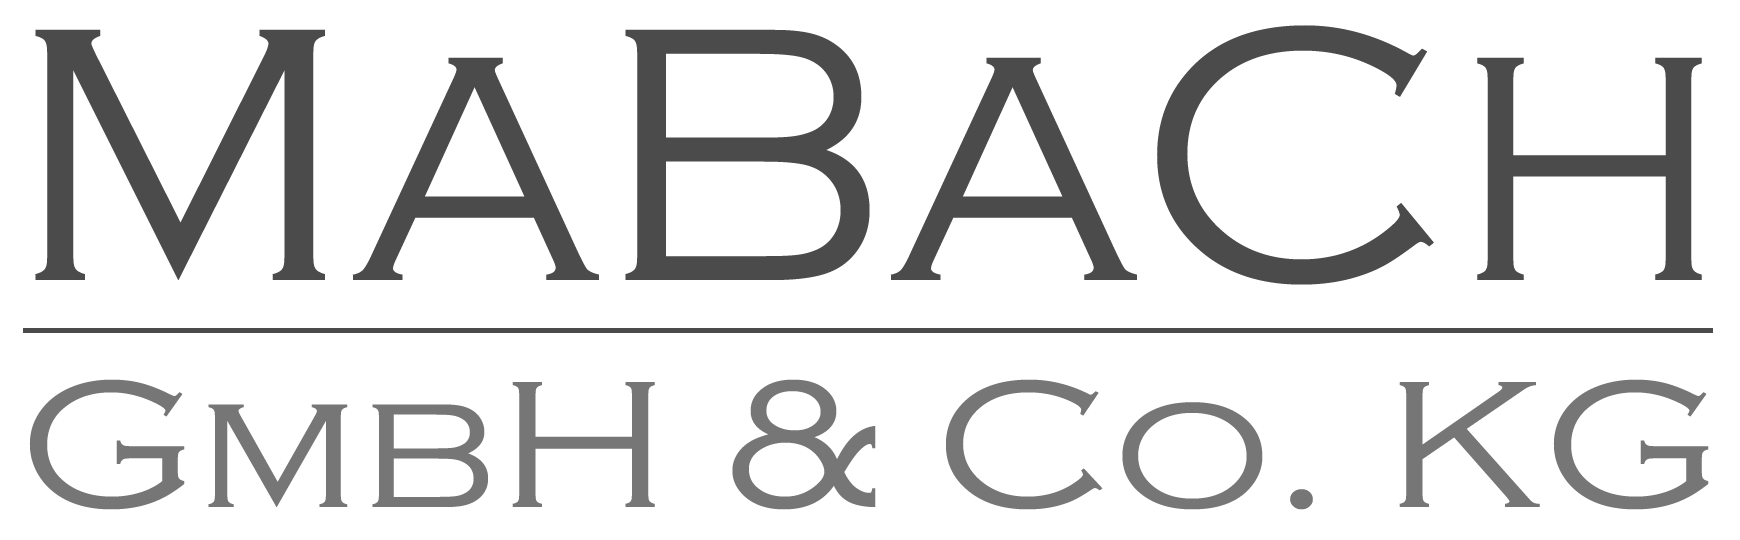 MABACH GmbH & Co. KG